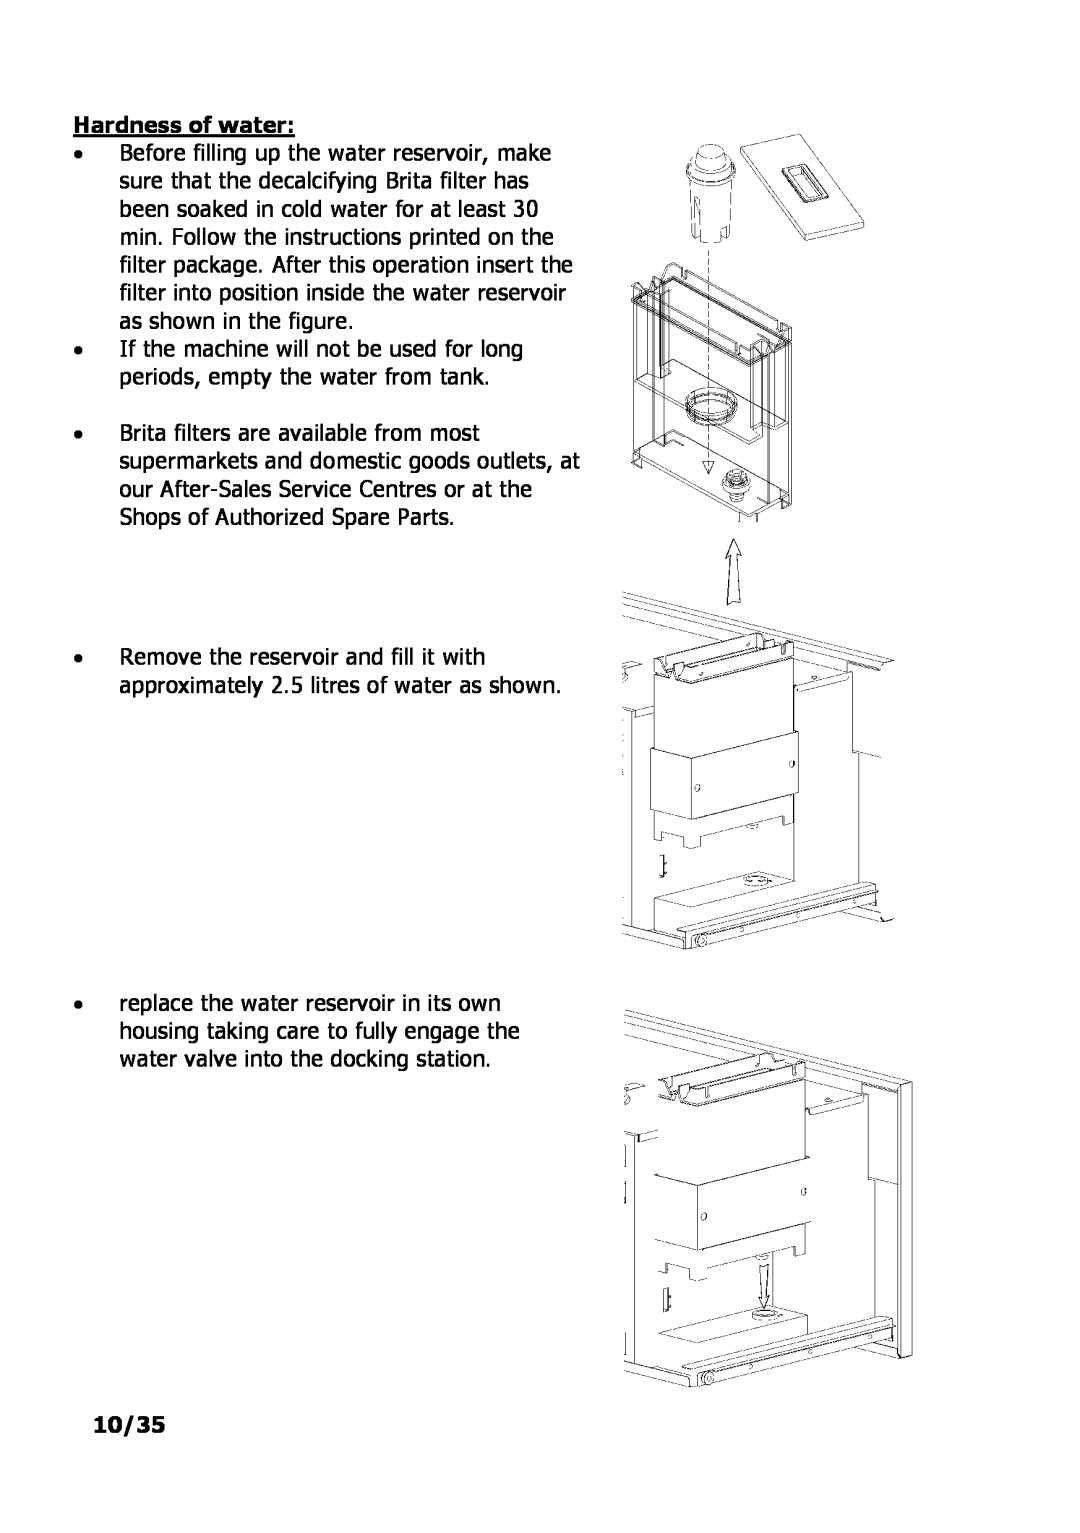 Electrolux PE 9038-m fww installation instructions Hardness of water, 10/35 